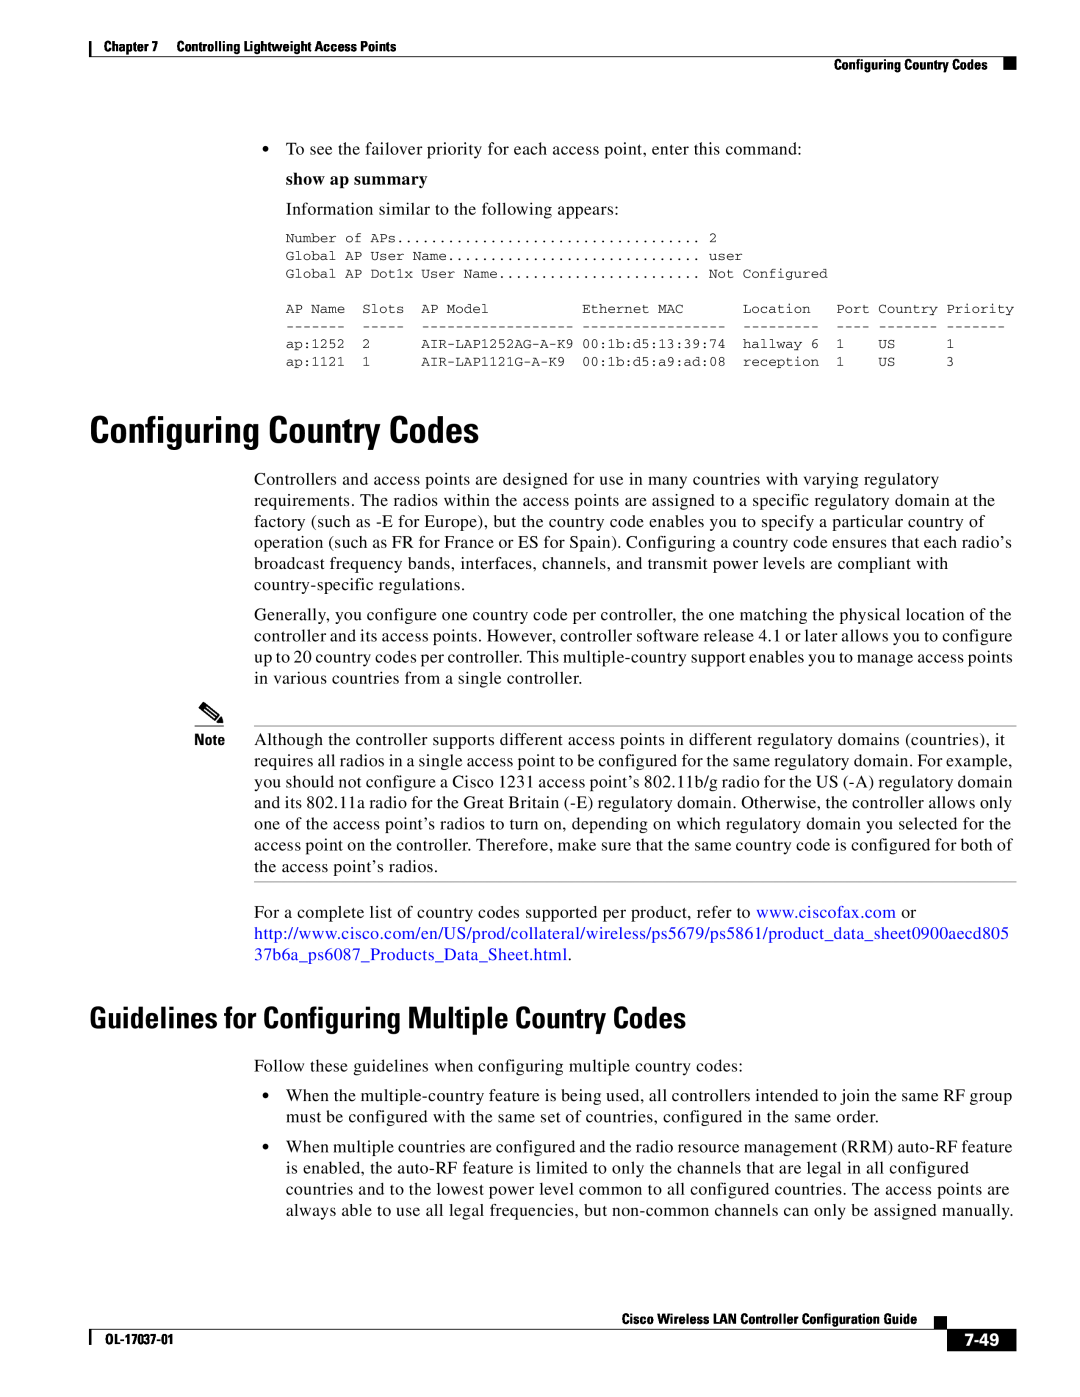 Cisco Systems OL-17037-01 manual Configuring Country Codes, Guidelines for Configuring Multiple Country Codes, 7-49 